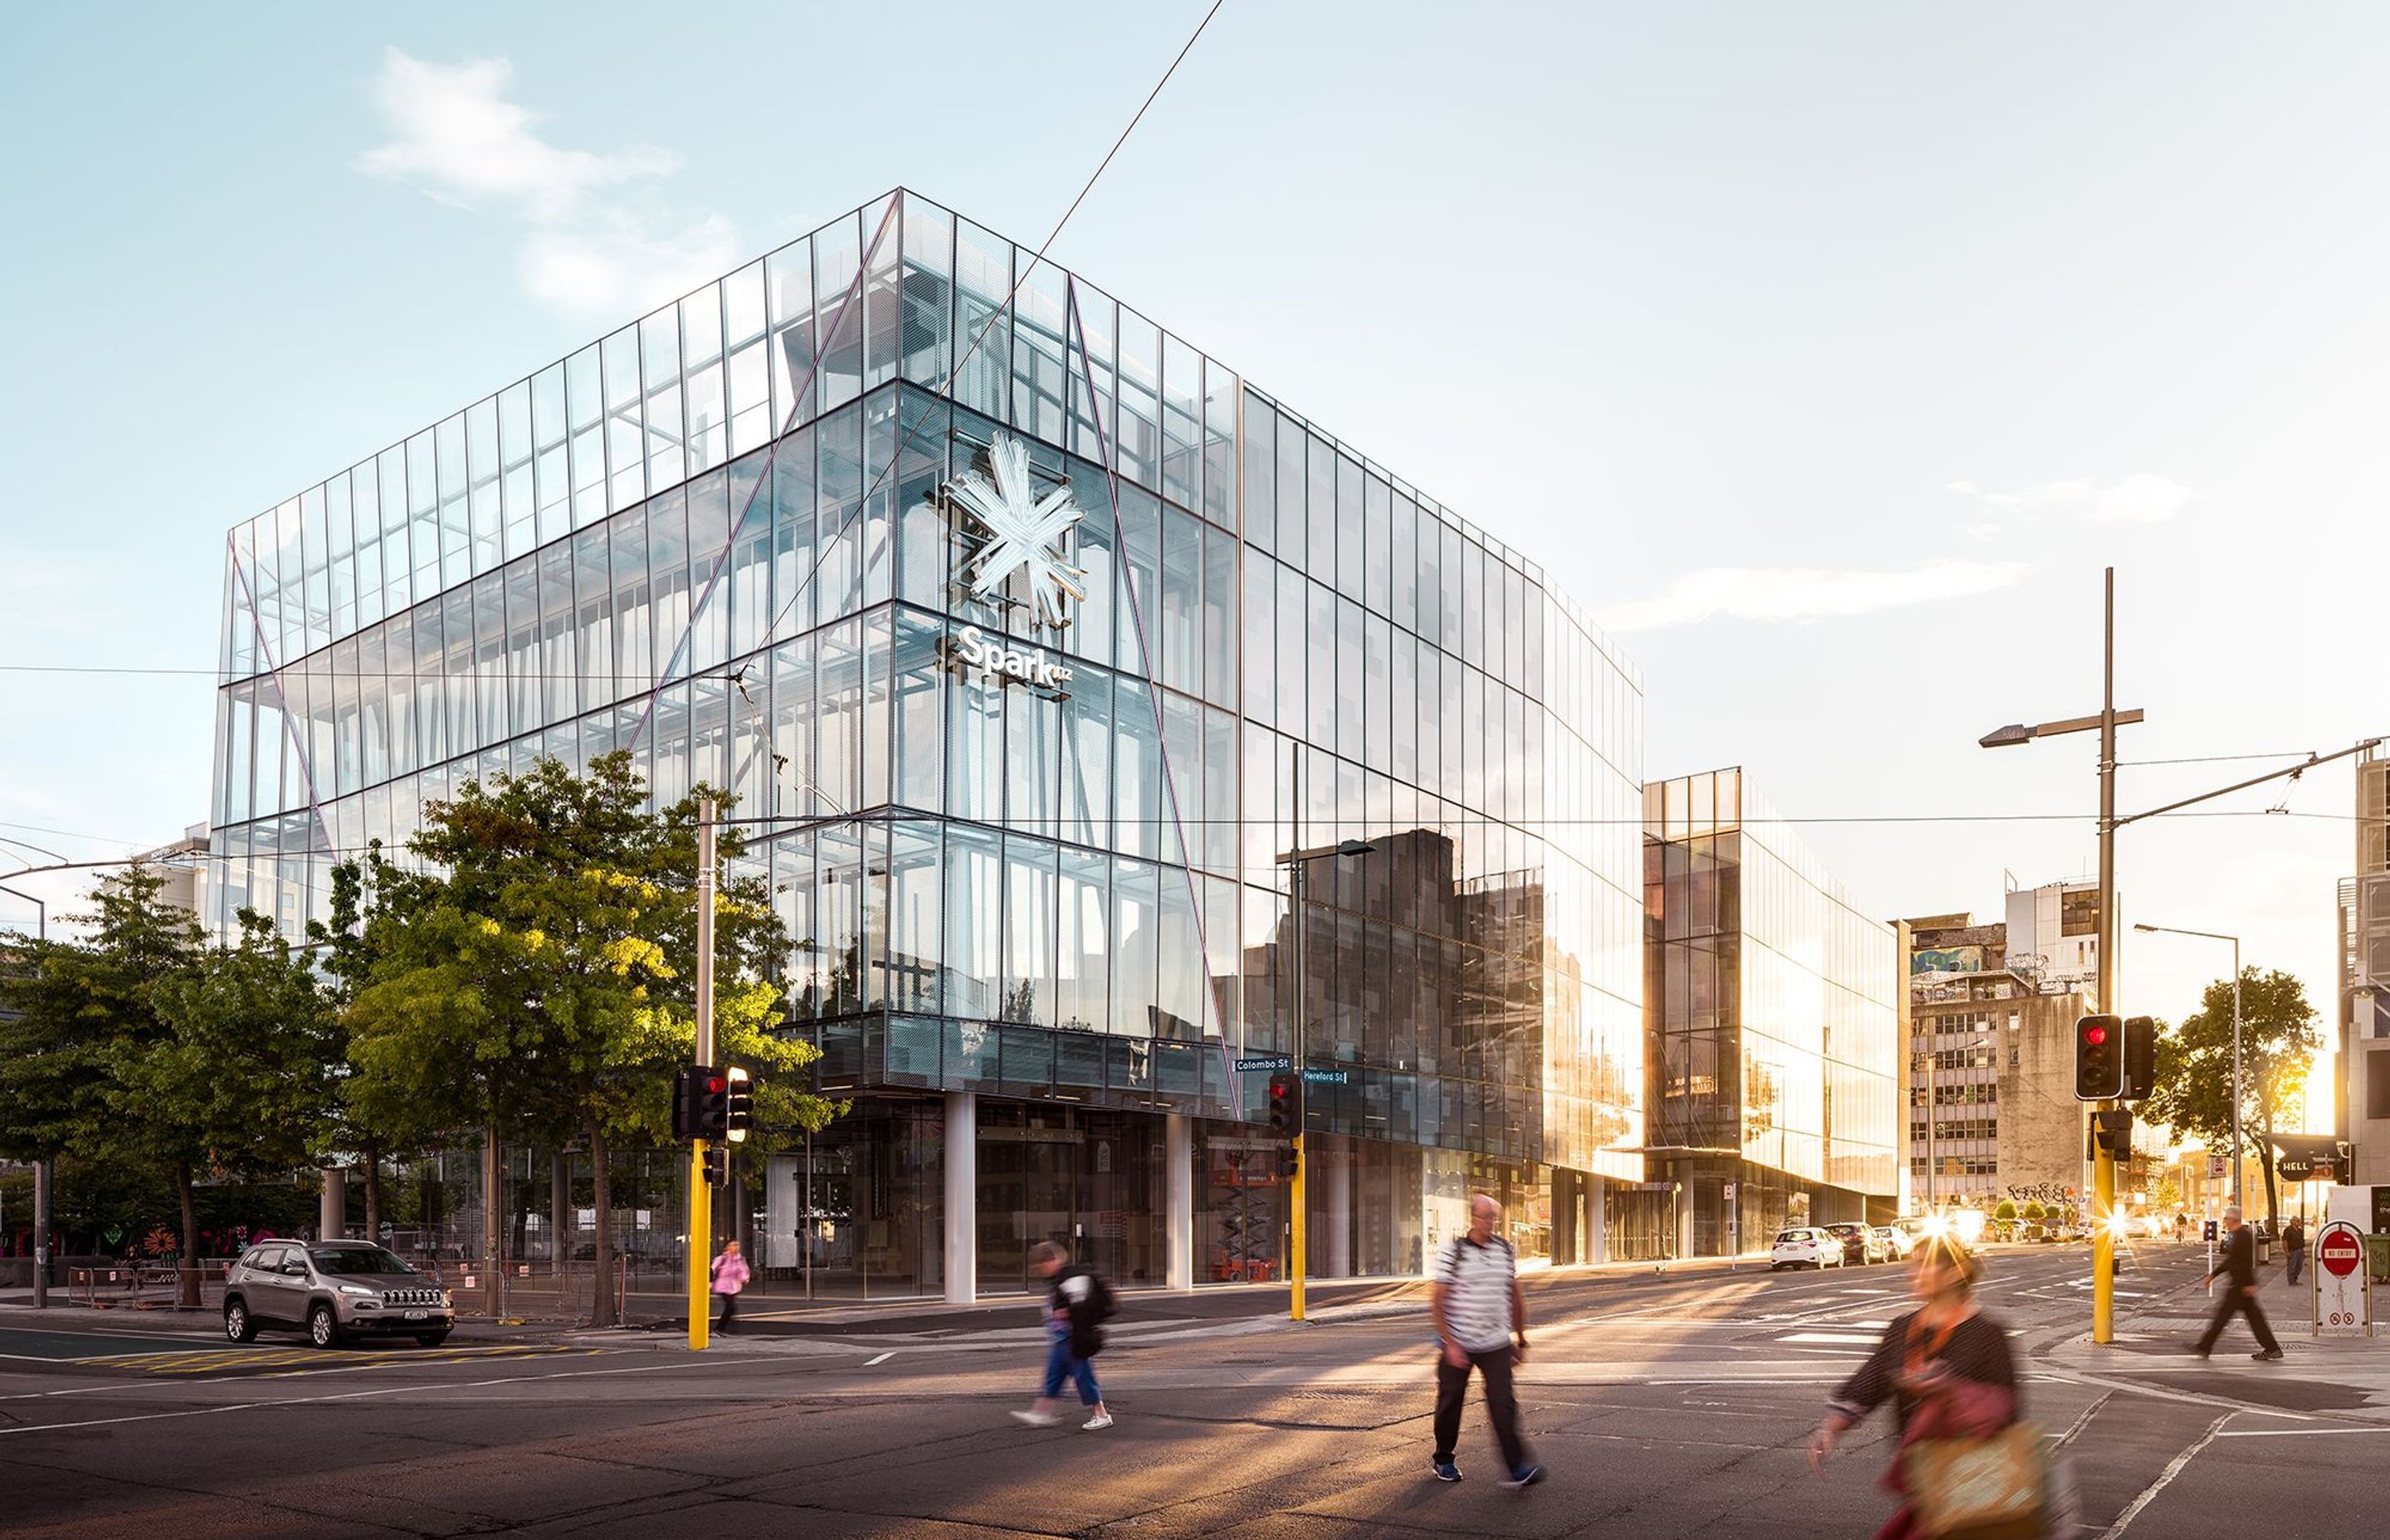 The landmark HQ of Spark NZ is the first new building completed by private developers in Cathedral Square since the earthquakes. All photography by Dennis Radermacher/Lightforge.